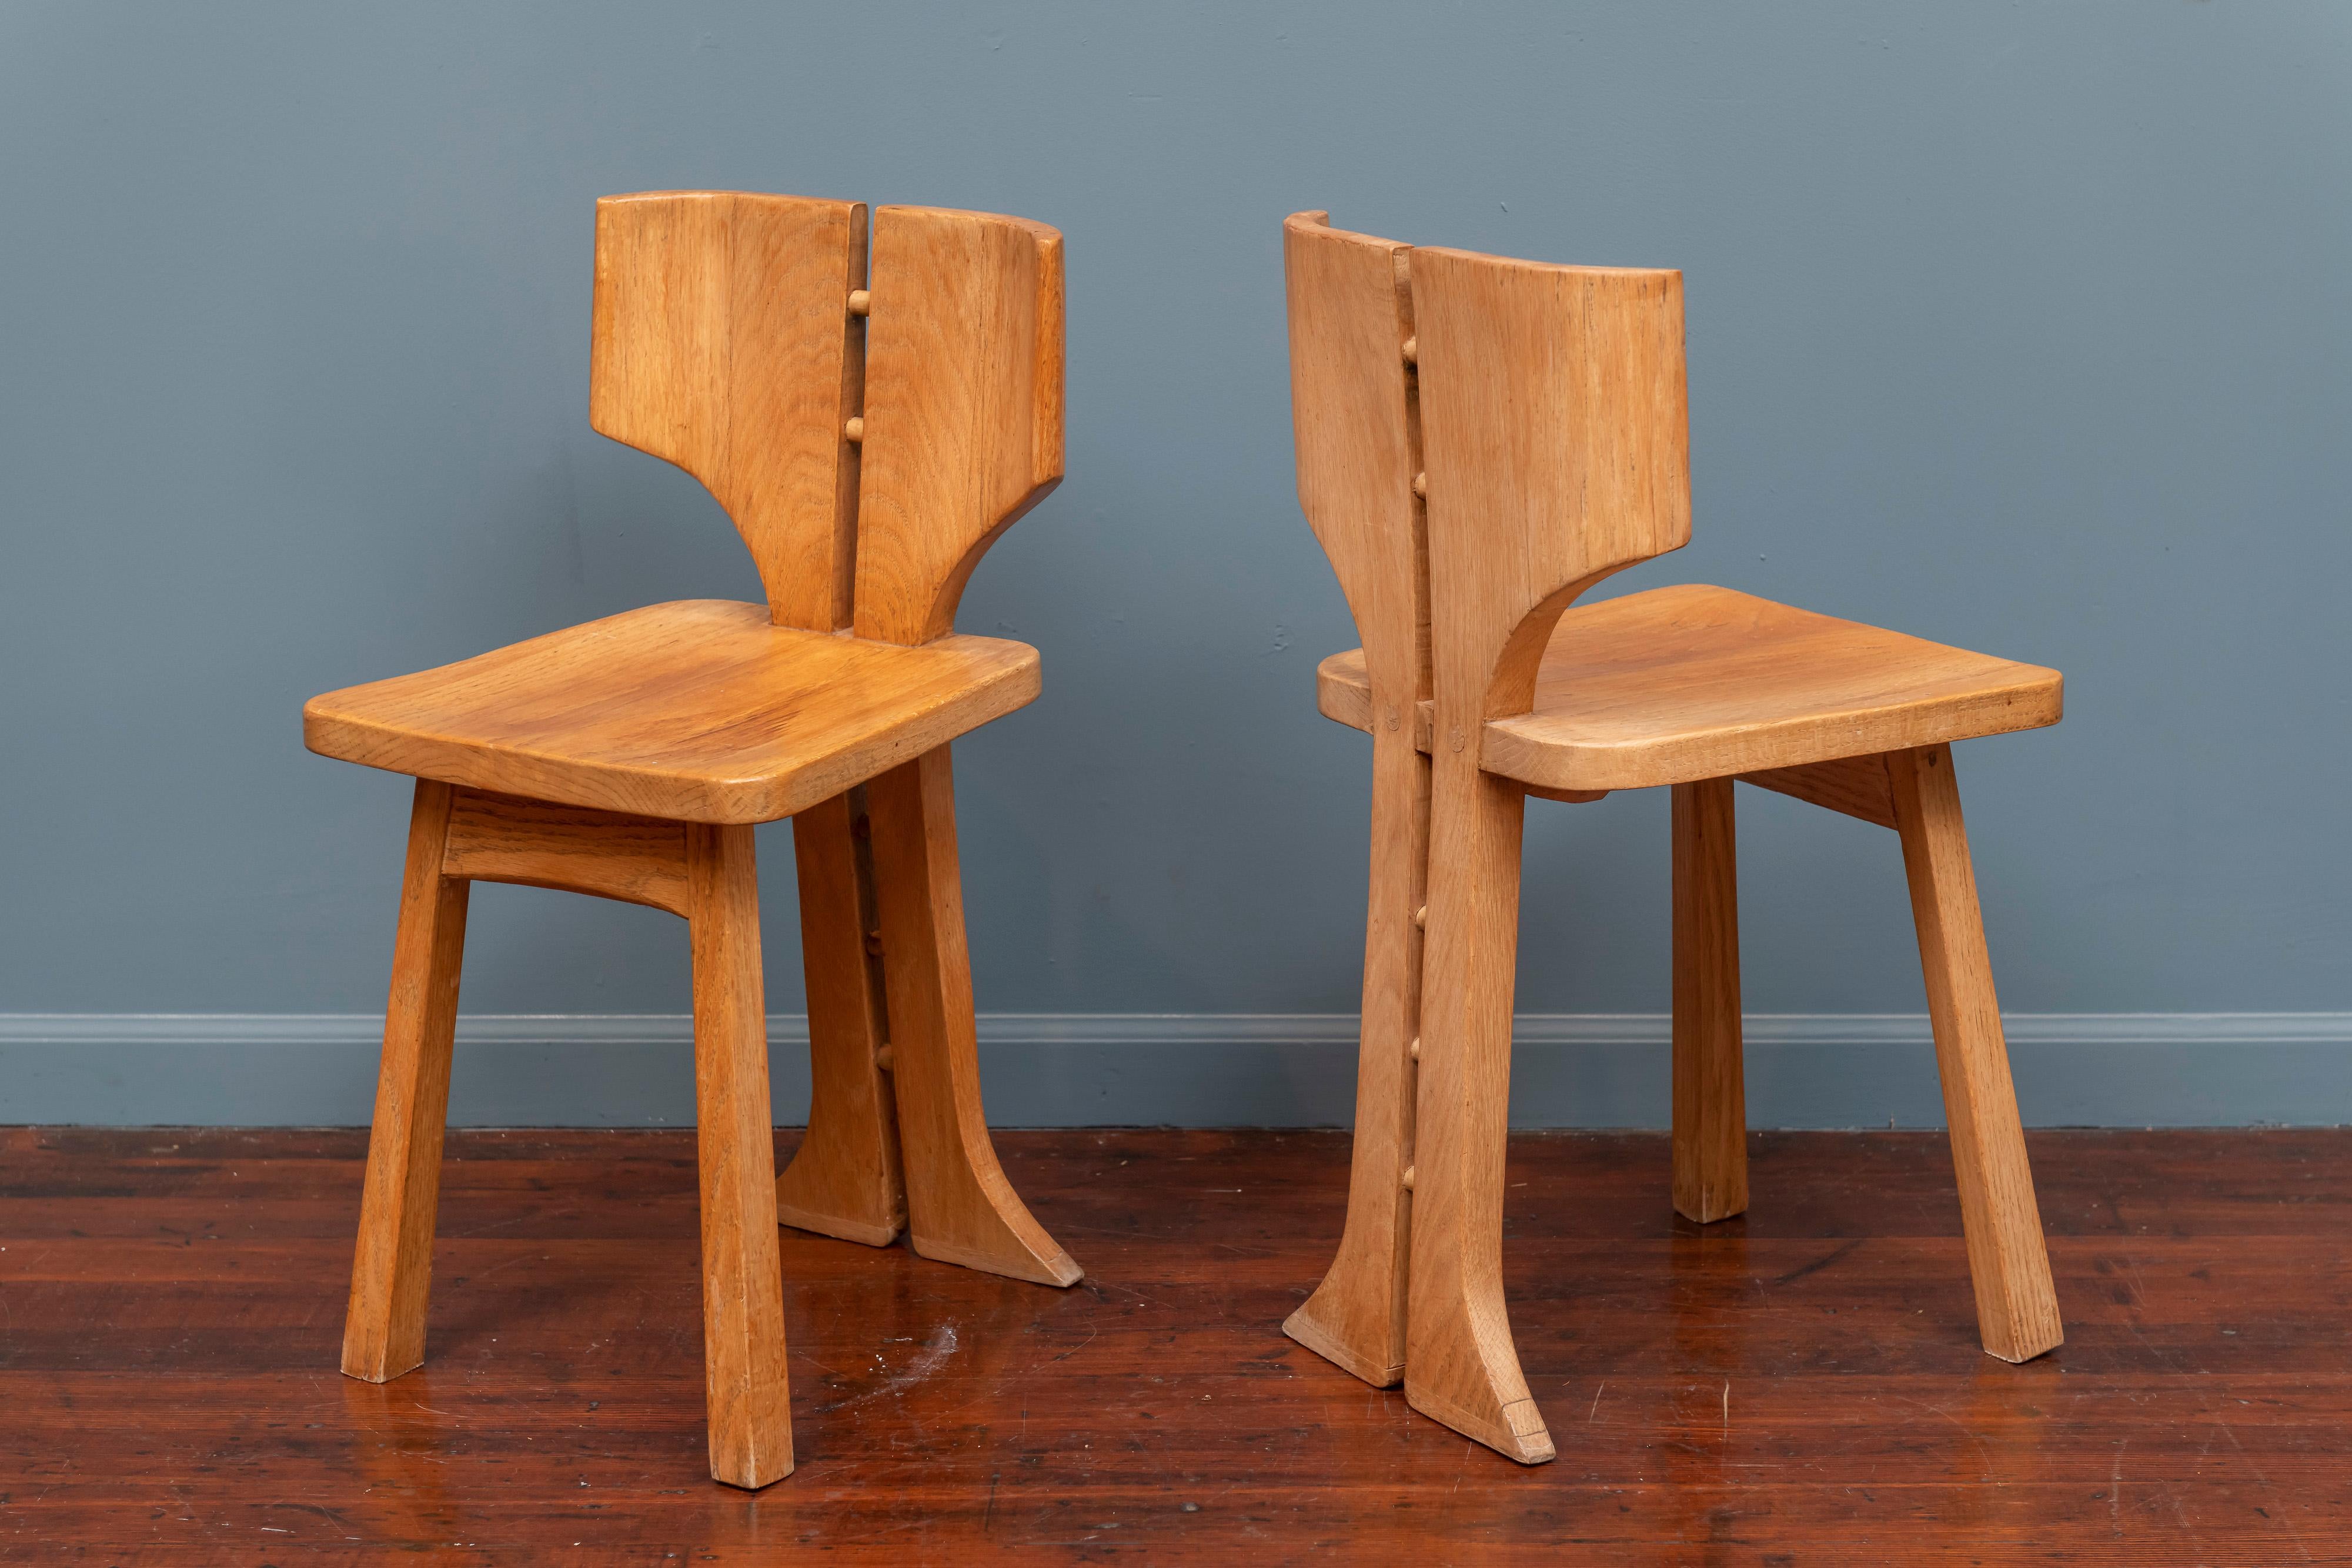 Pierre Gautier-Delaye design side chairs with stylized split backs, curved seat and supports. Made in oak with an eye-catching form these would serve as accent or pull up chairs for a modernist pop art interior.